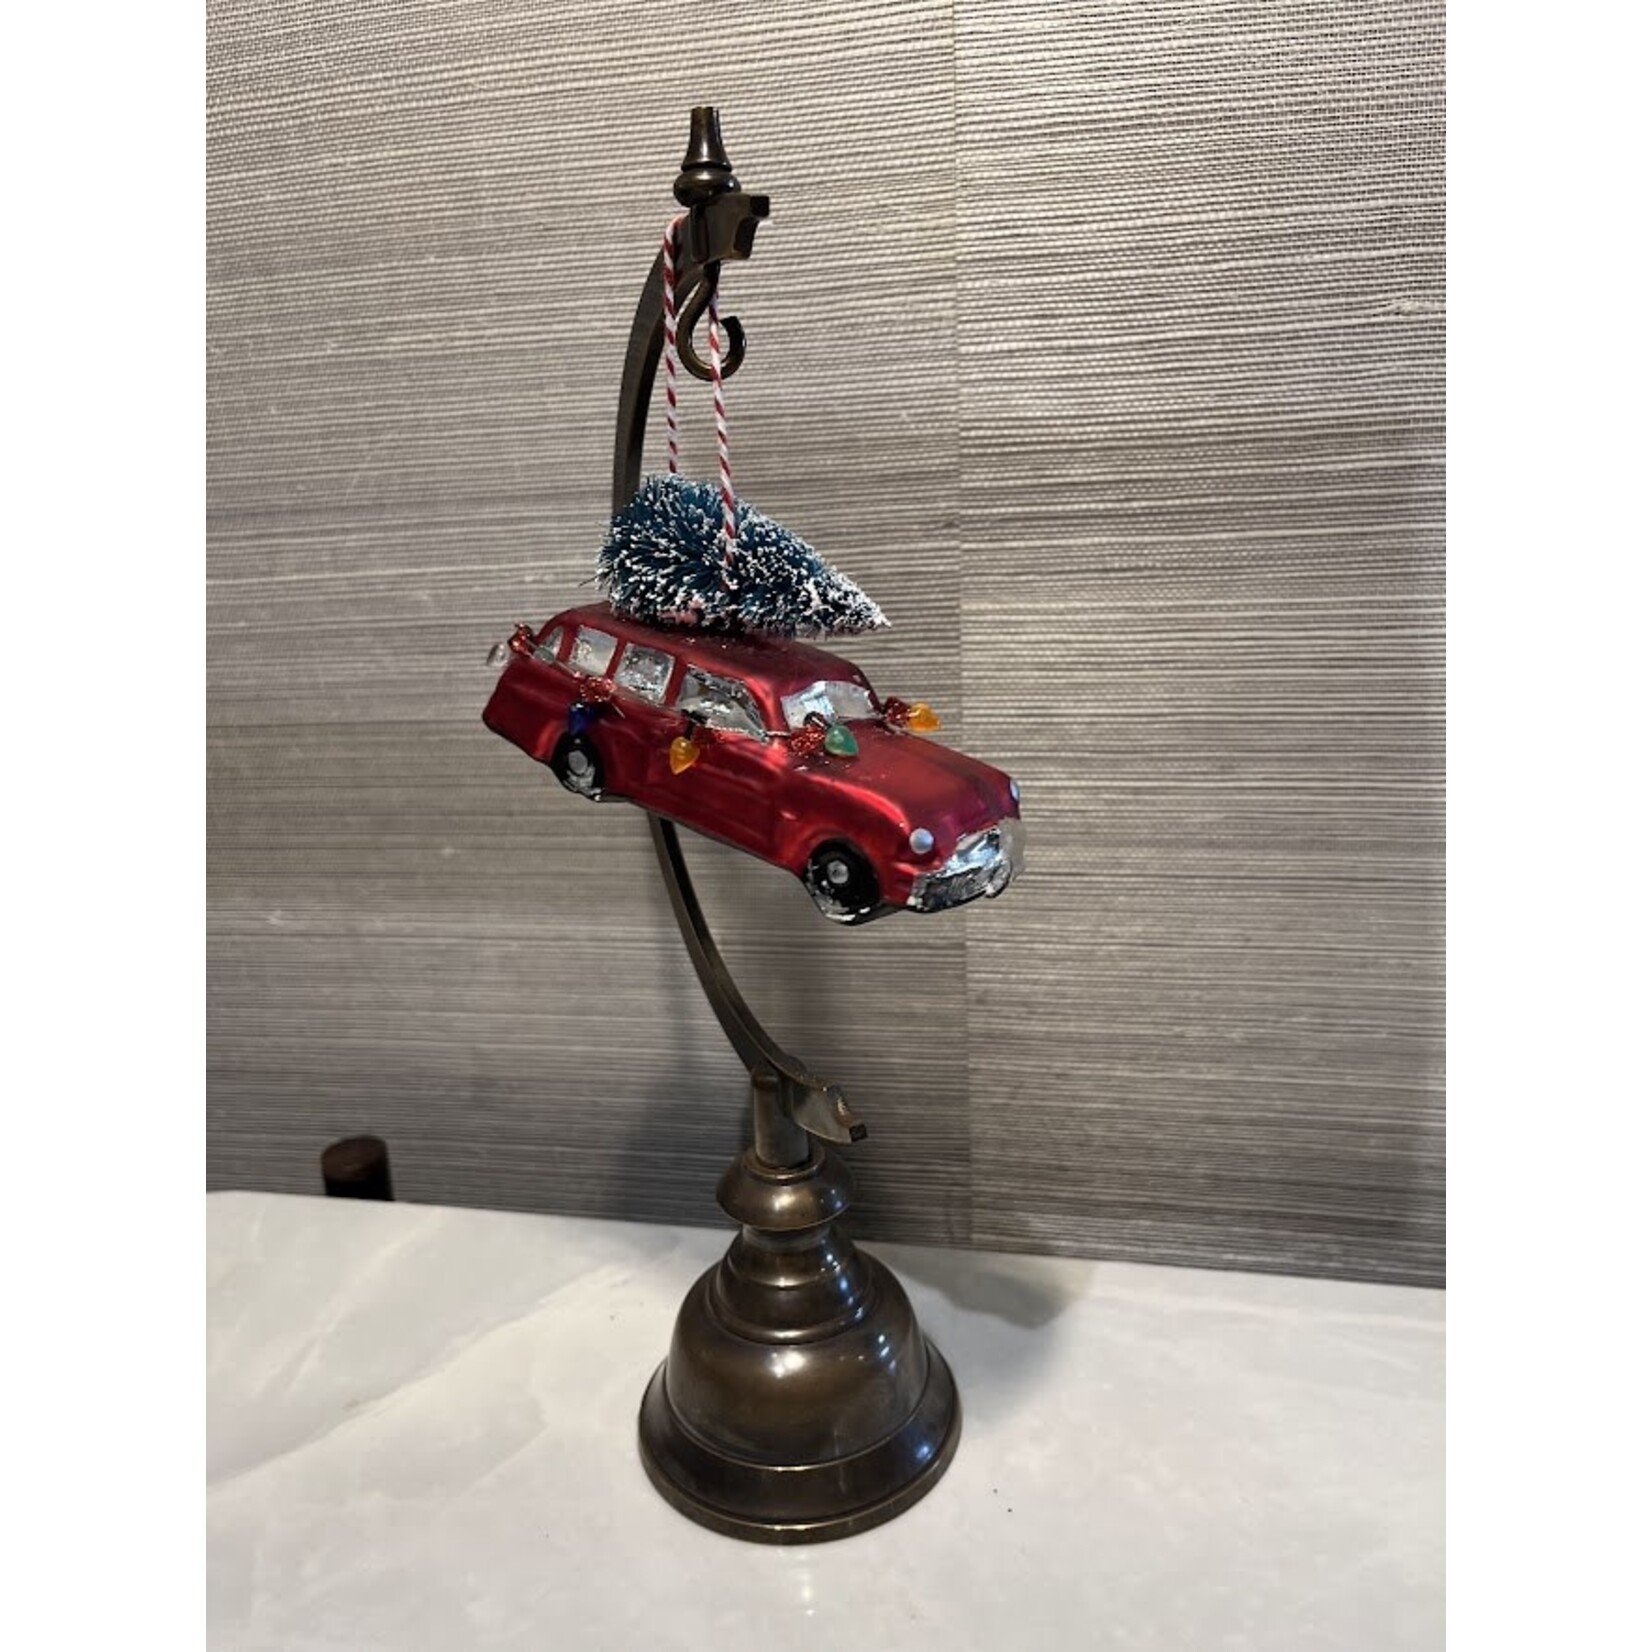 Two's Company Vintage Car Ornament with Tree